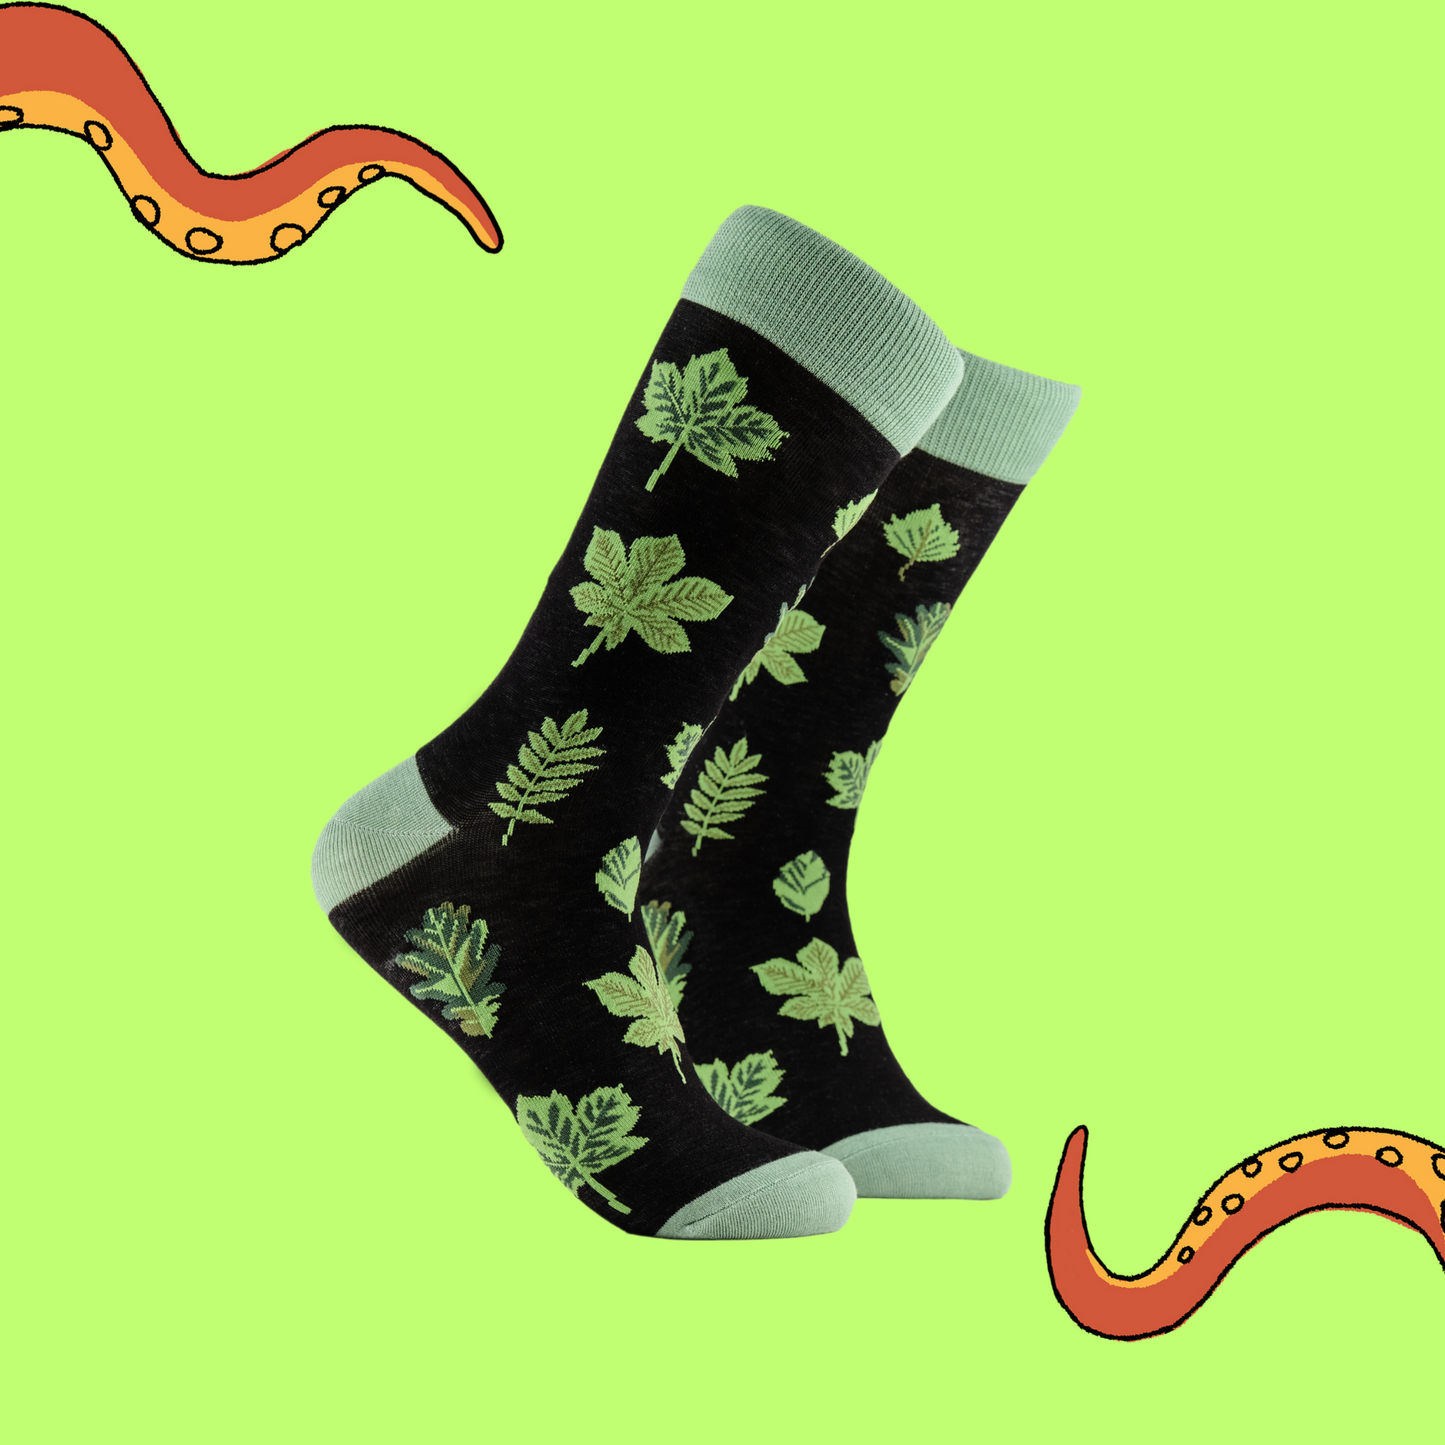 A pair of socks depicting bamboo leaves. Black legs, light green cuff, heel and toe.